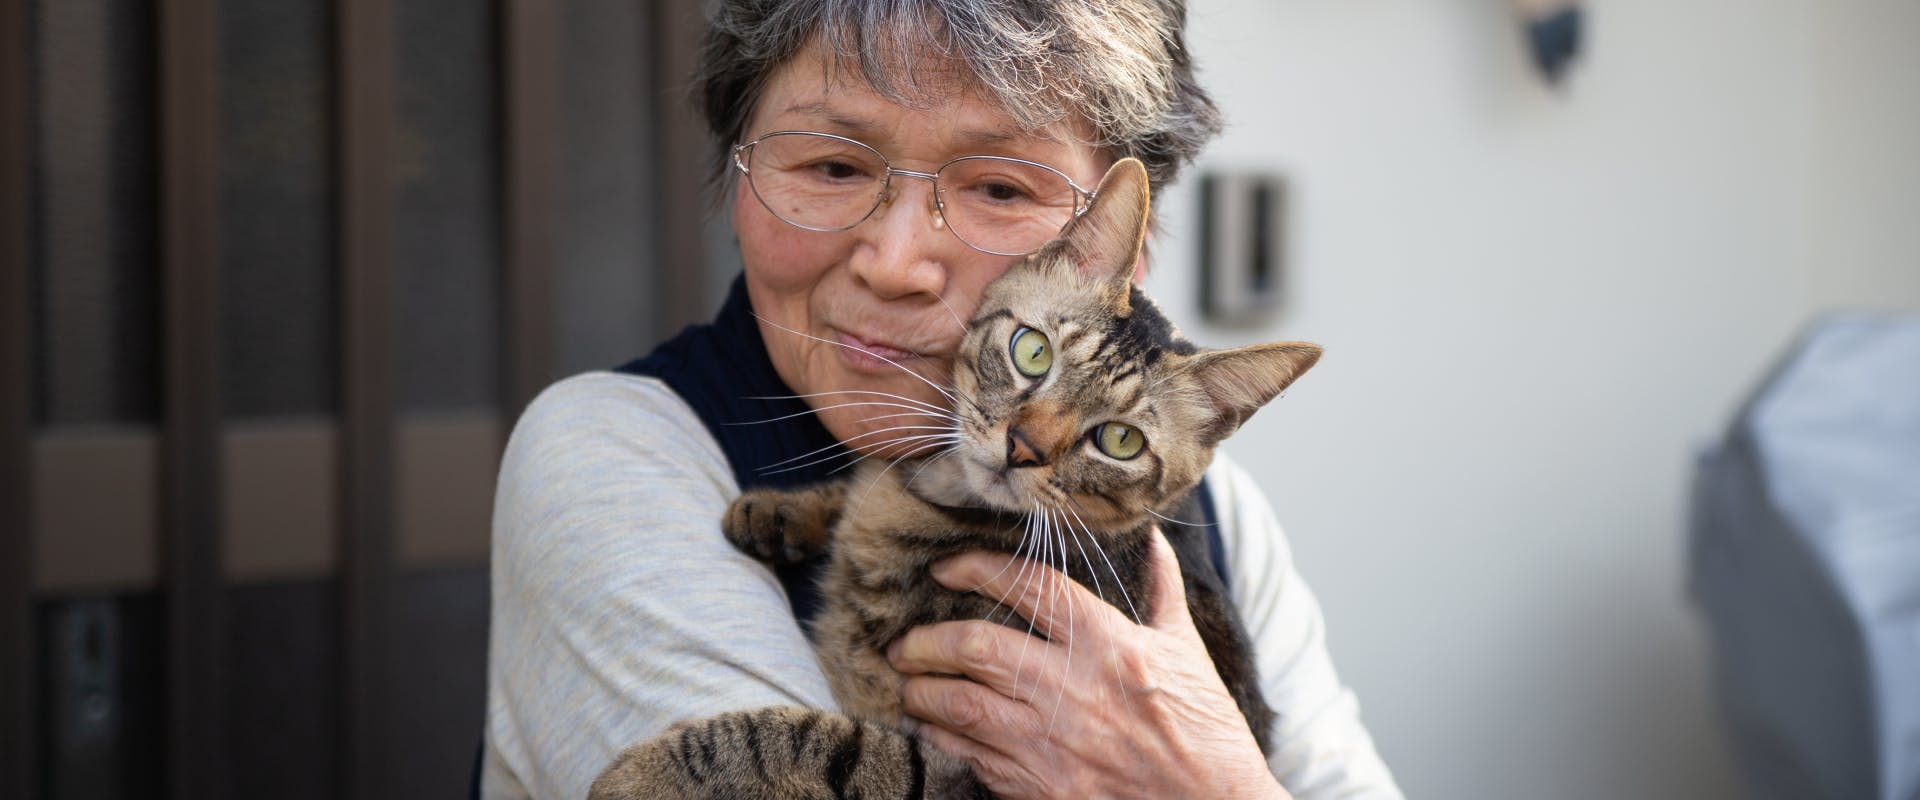 japanese woman holding a tabby cat